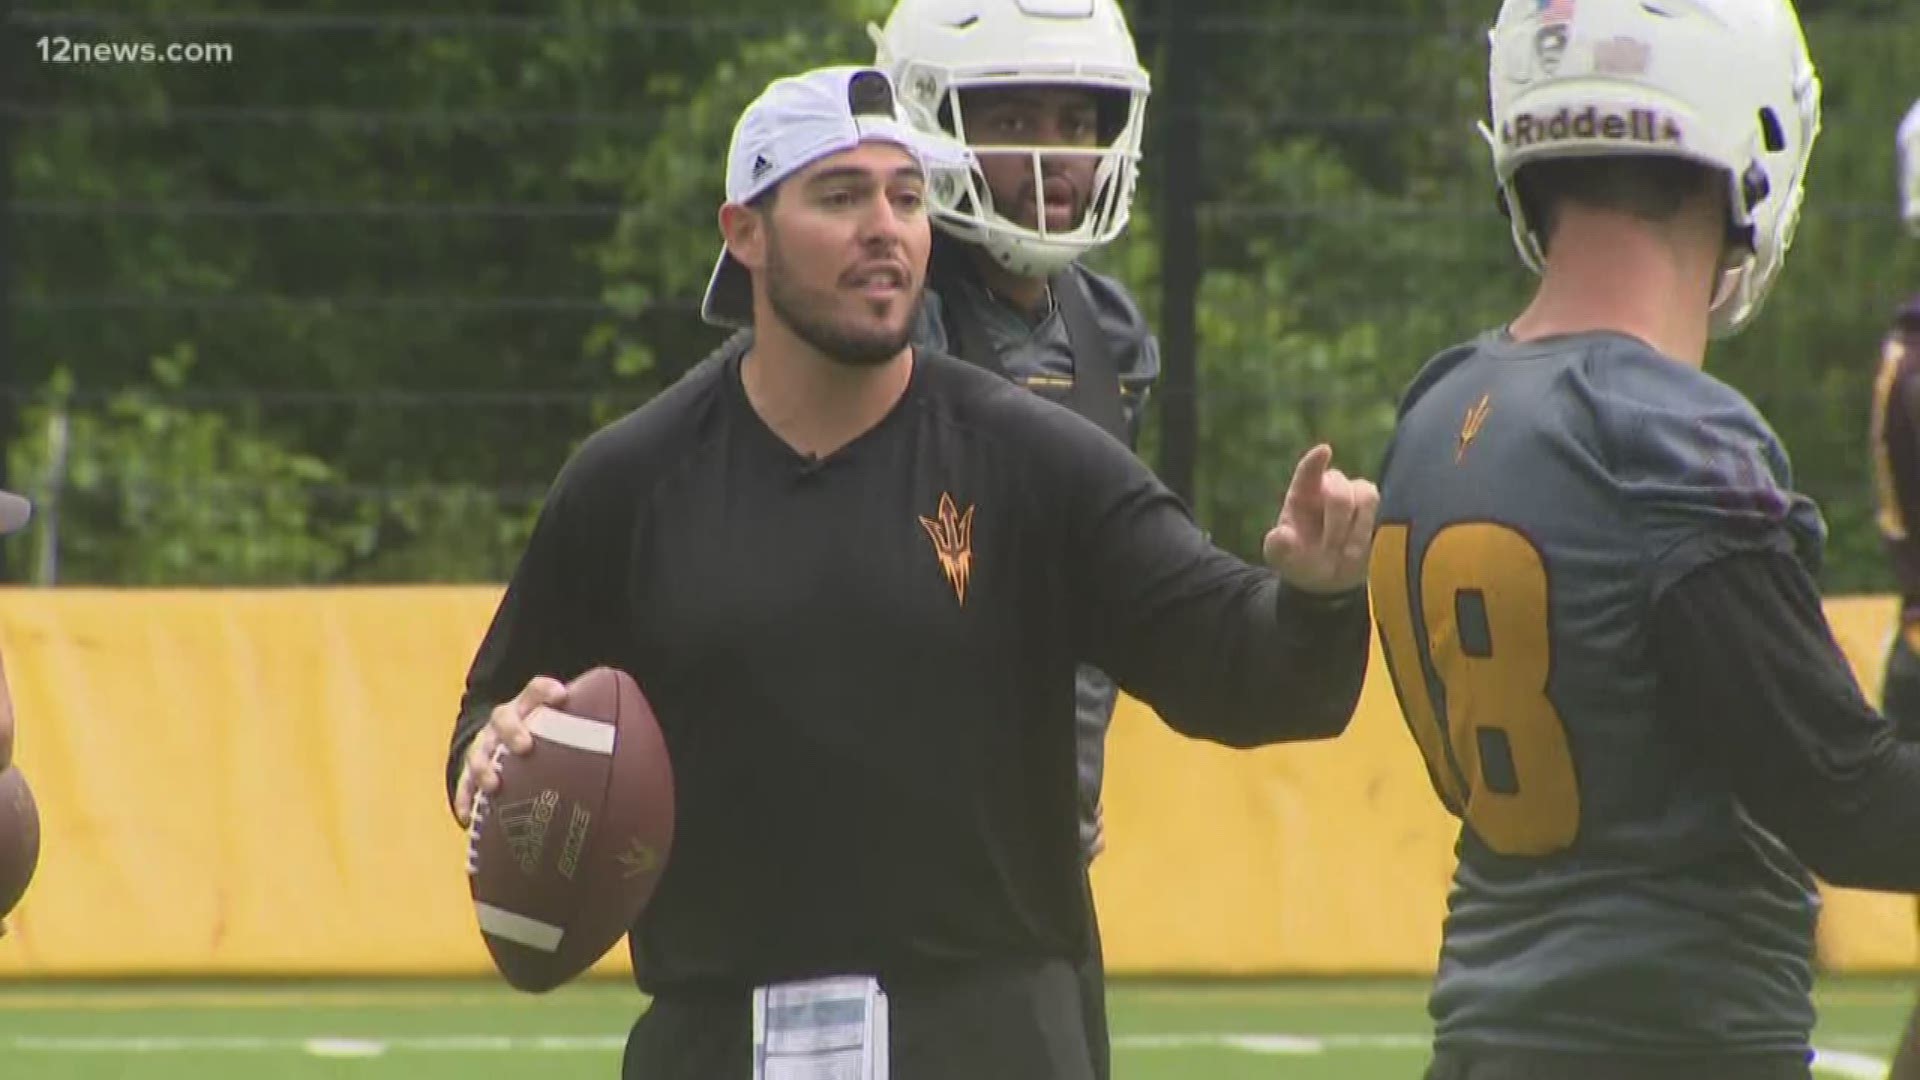 Former ASU quarterback Mike Bercovici joined the staff as a graduate assistant this year following a professional football career that never quite took off. Chierstin Susel has the story.